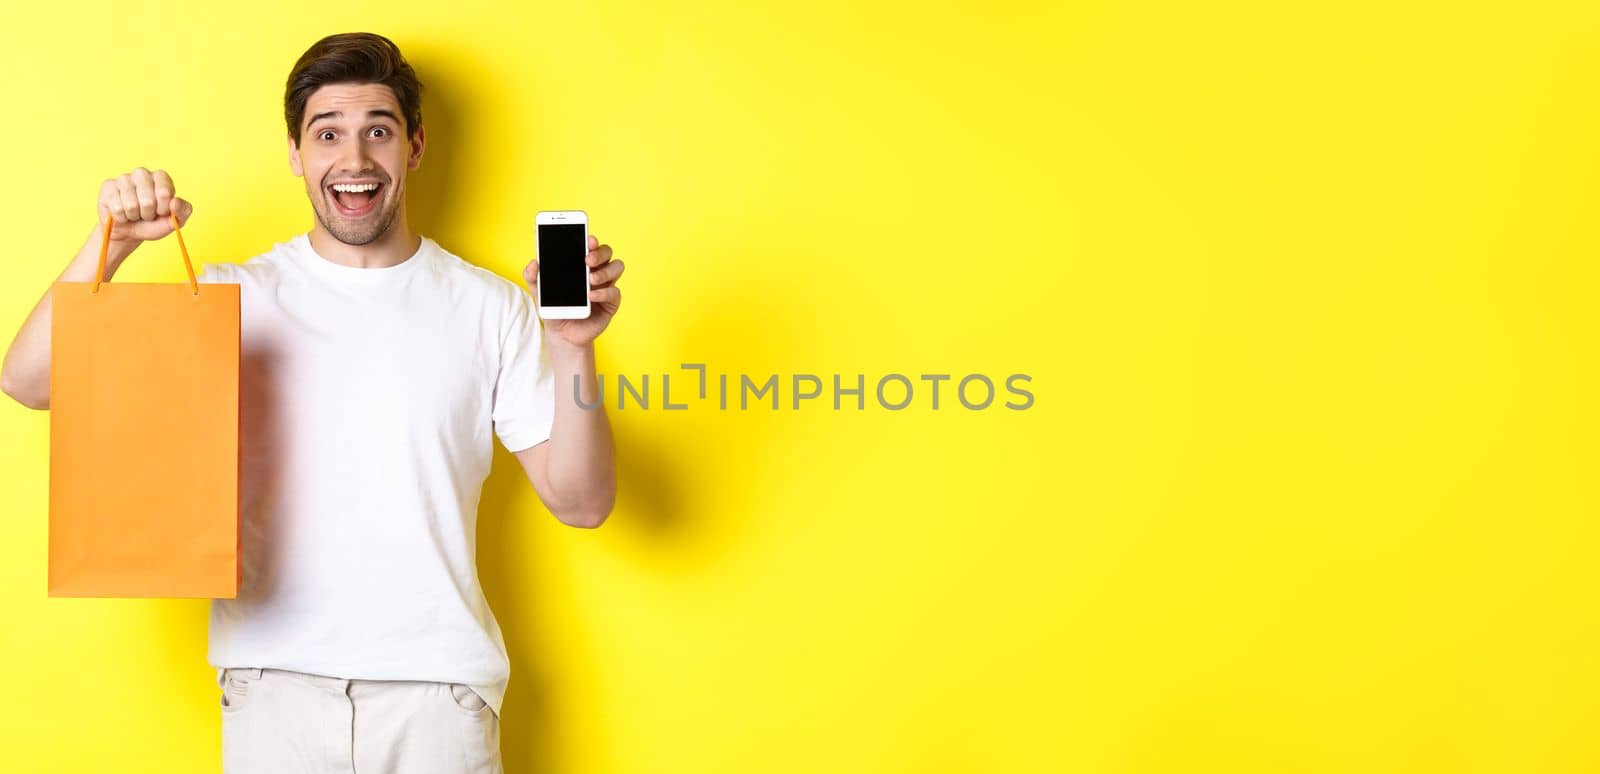 Surprised man holding shopping bag and showing smartphone screen, concept of mobile banking and app achievements, yellow background.